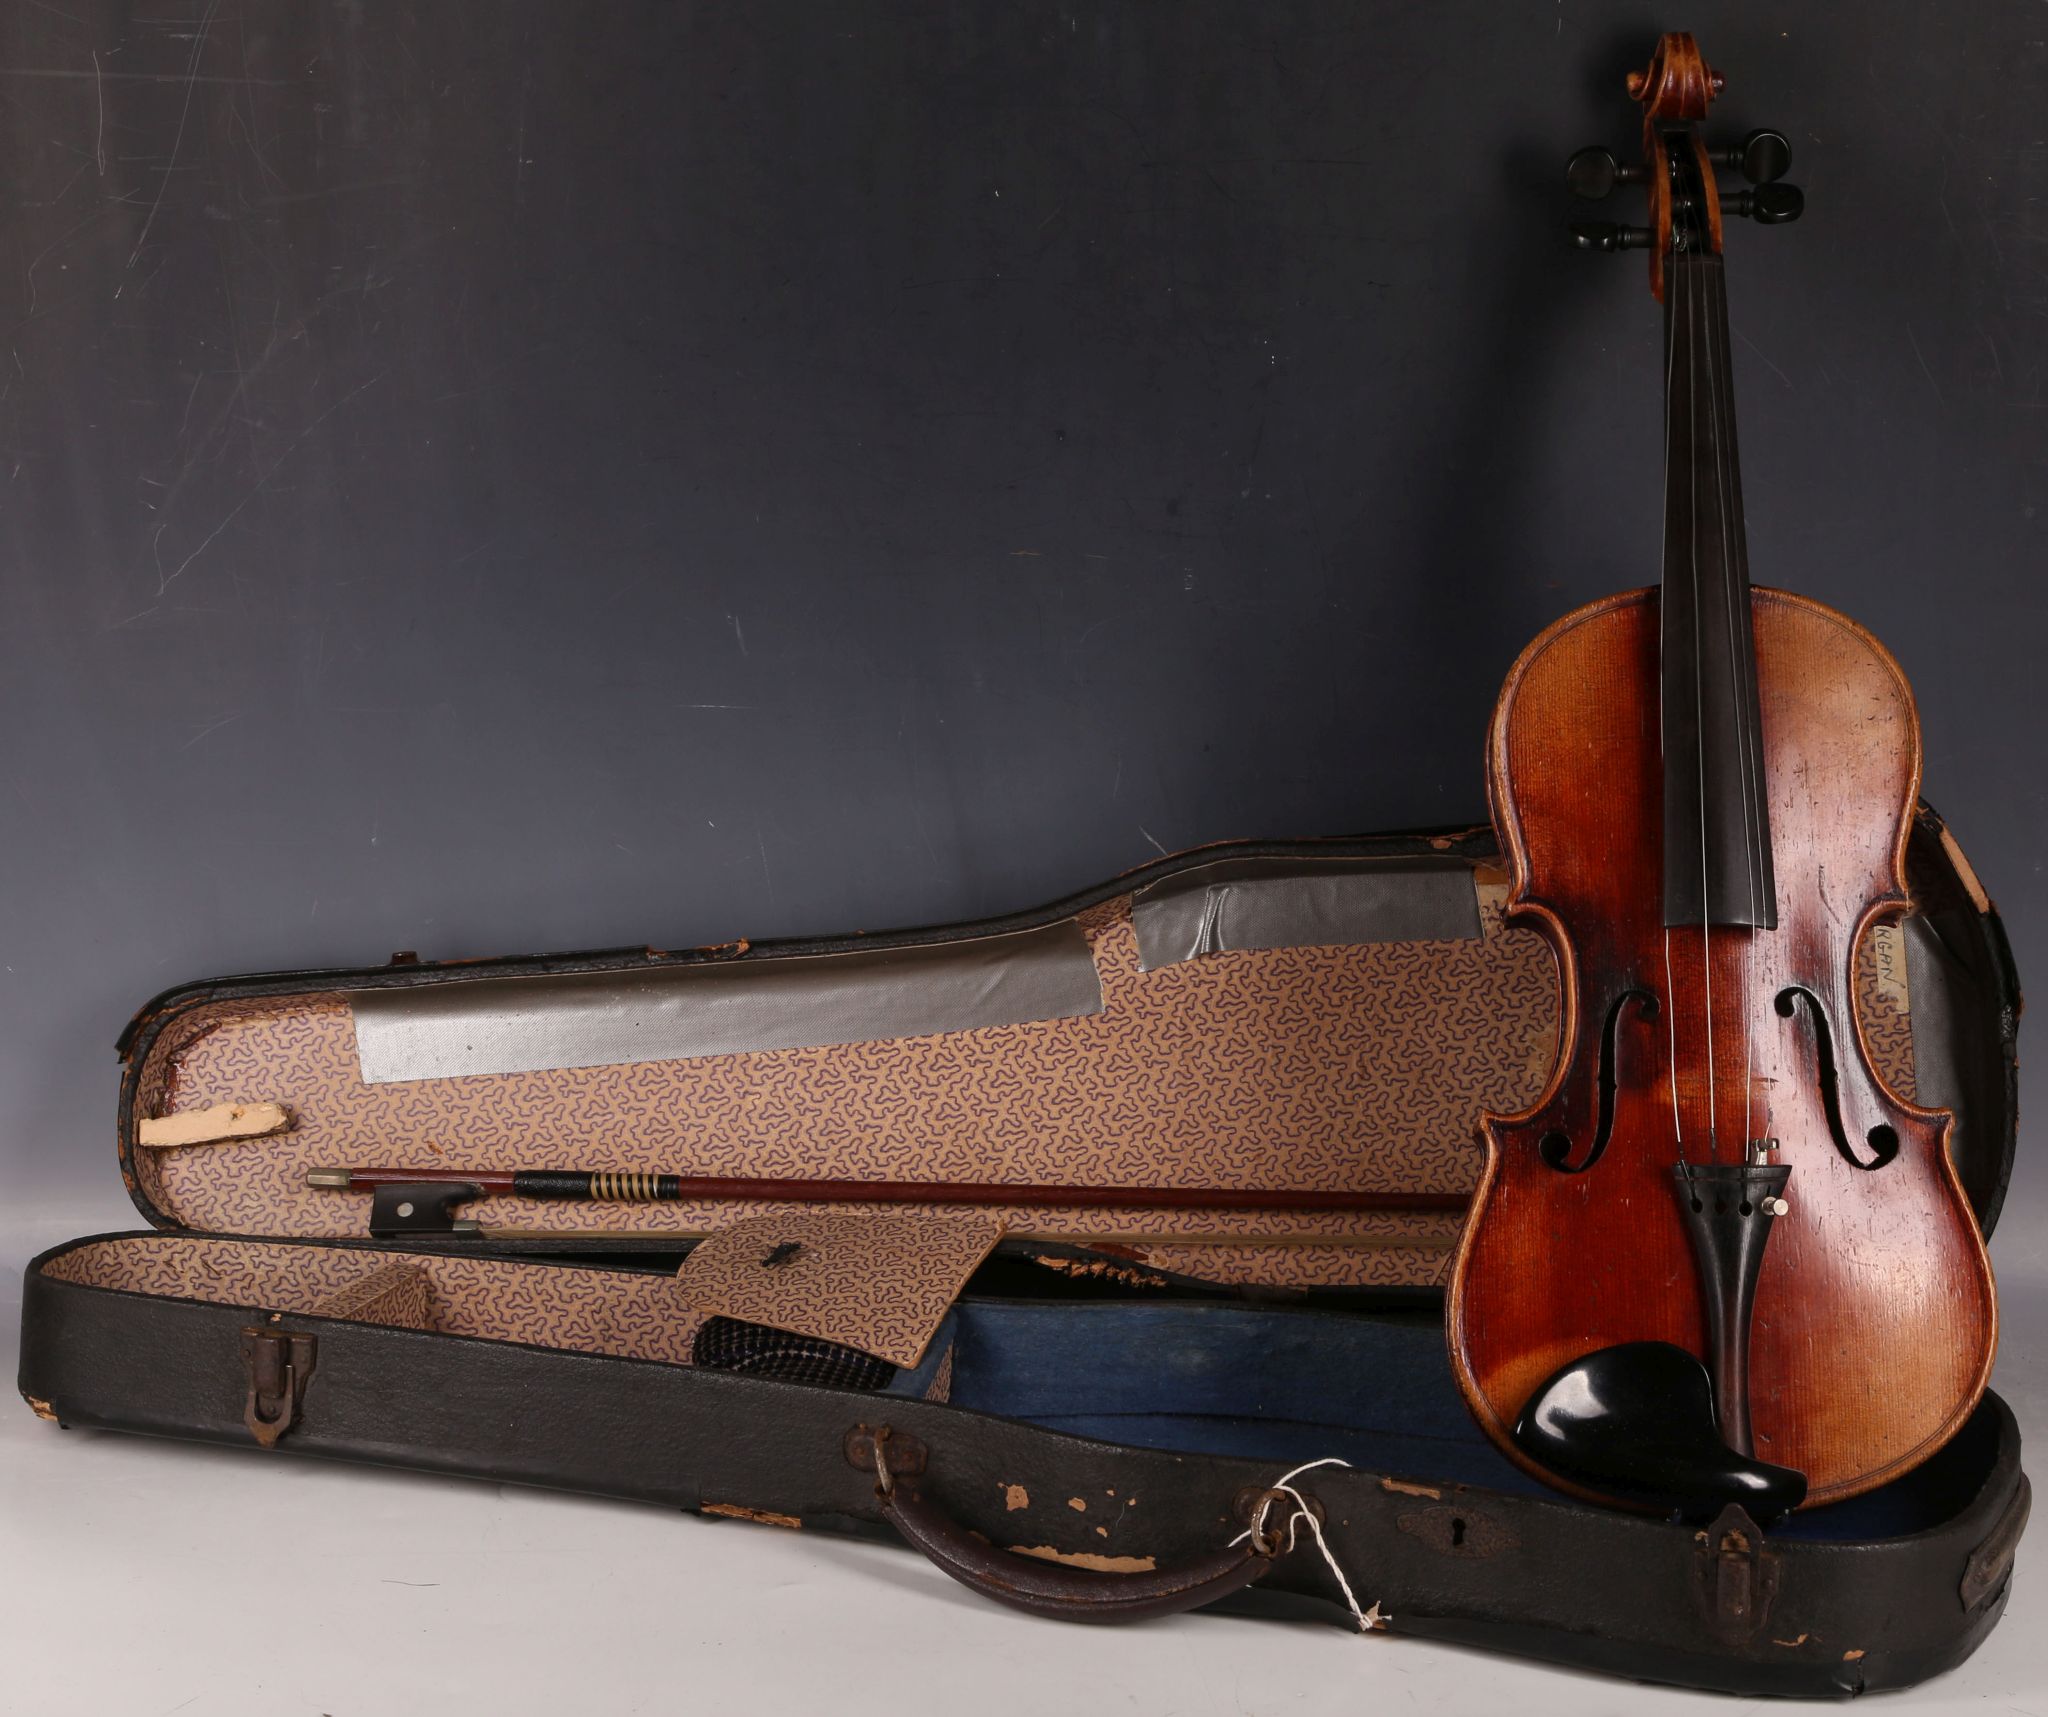 Gebruder Wolff violin, mahogany, two-piece 12¾" back, Creuznach label, case and bow.